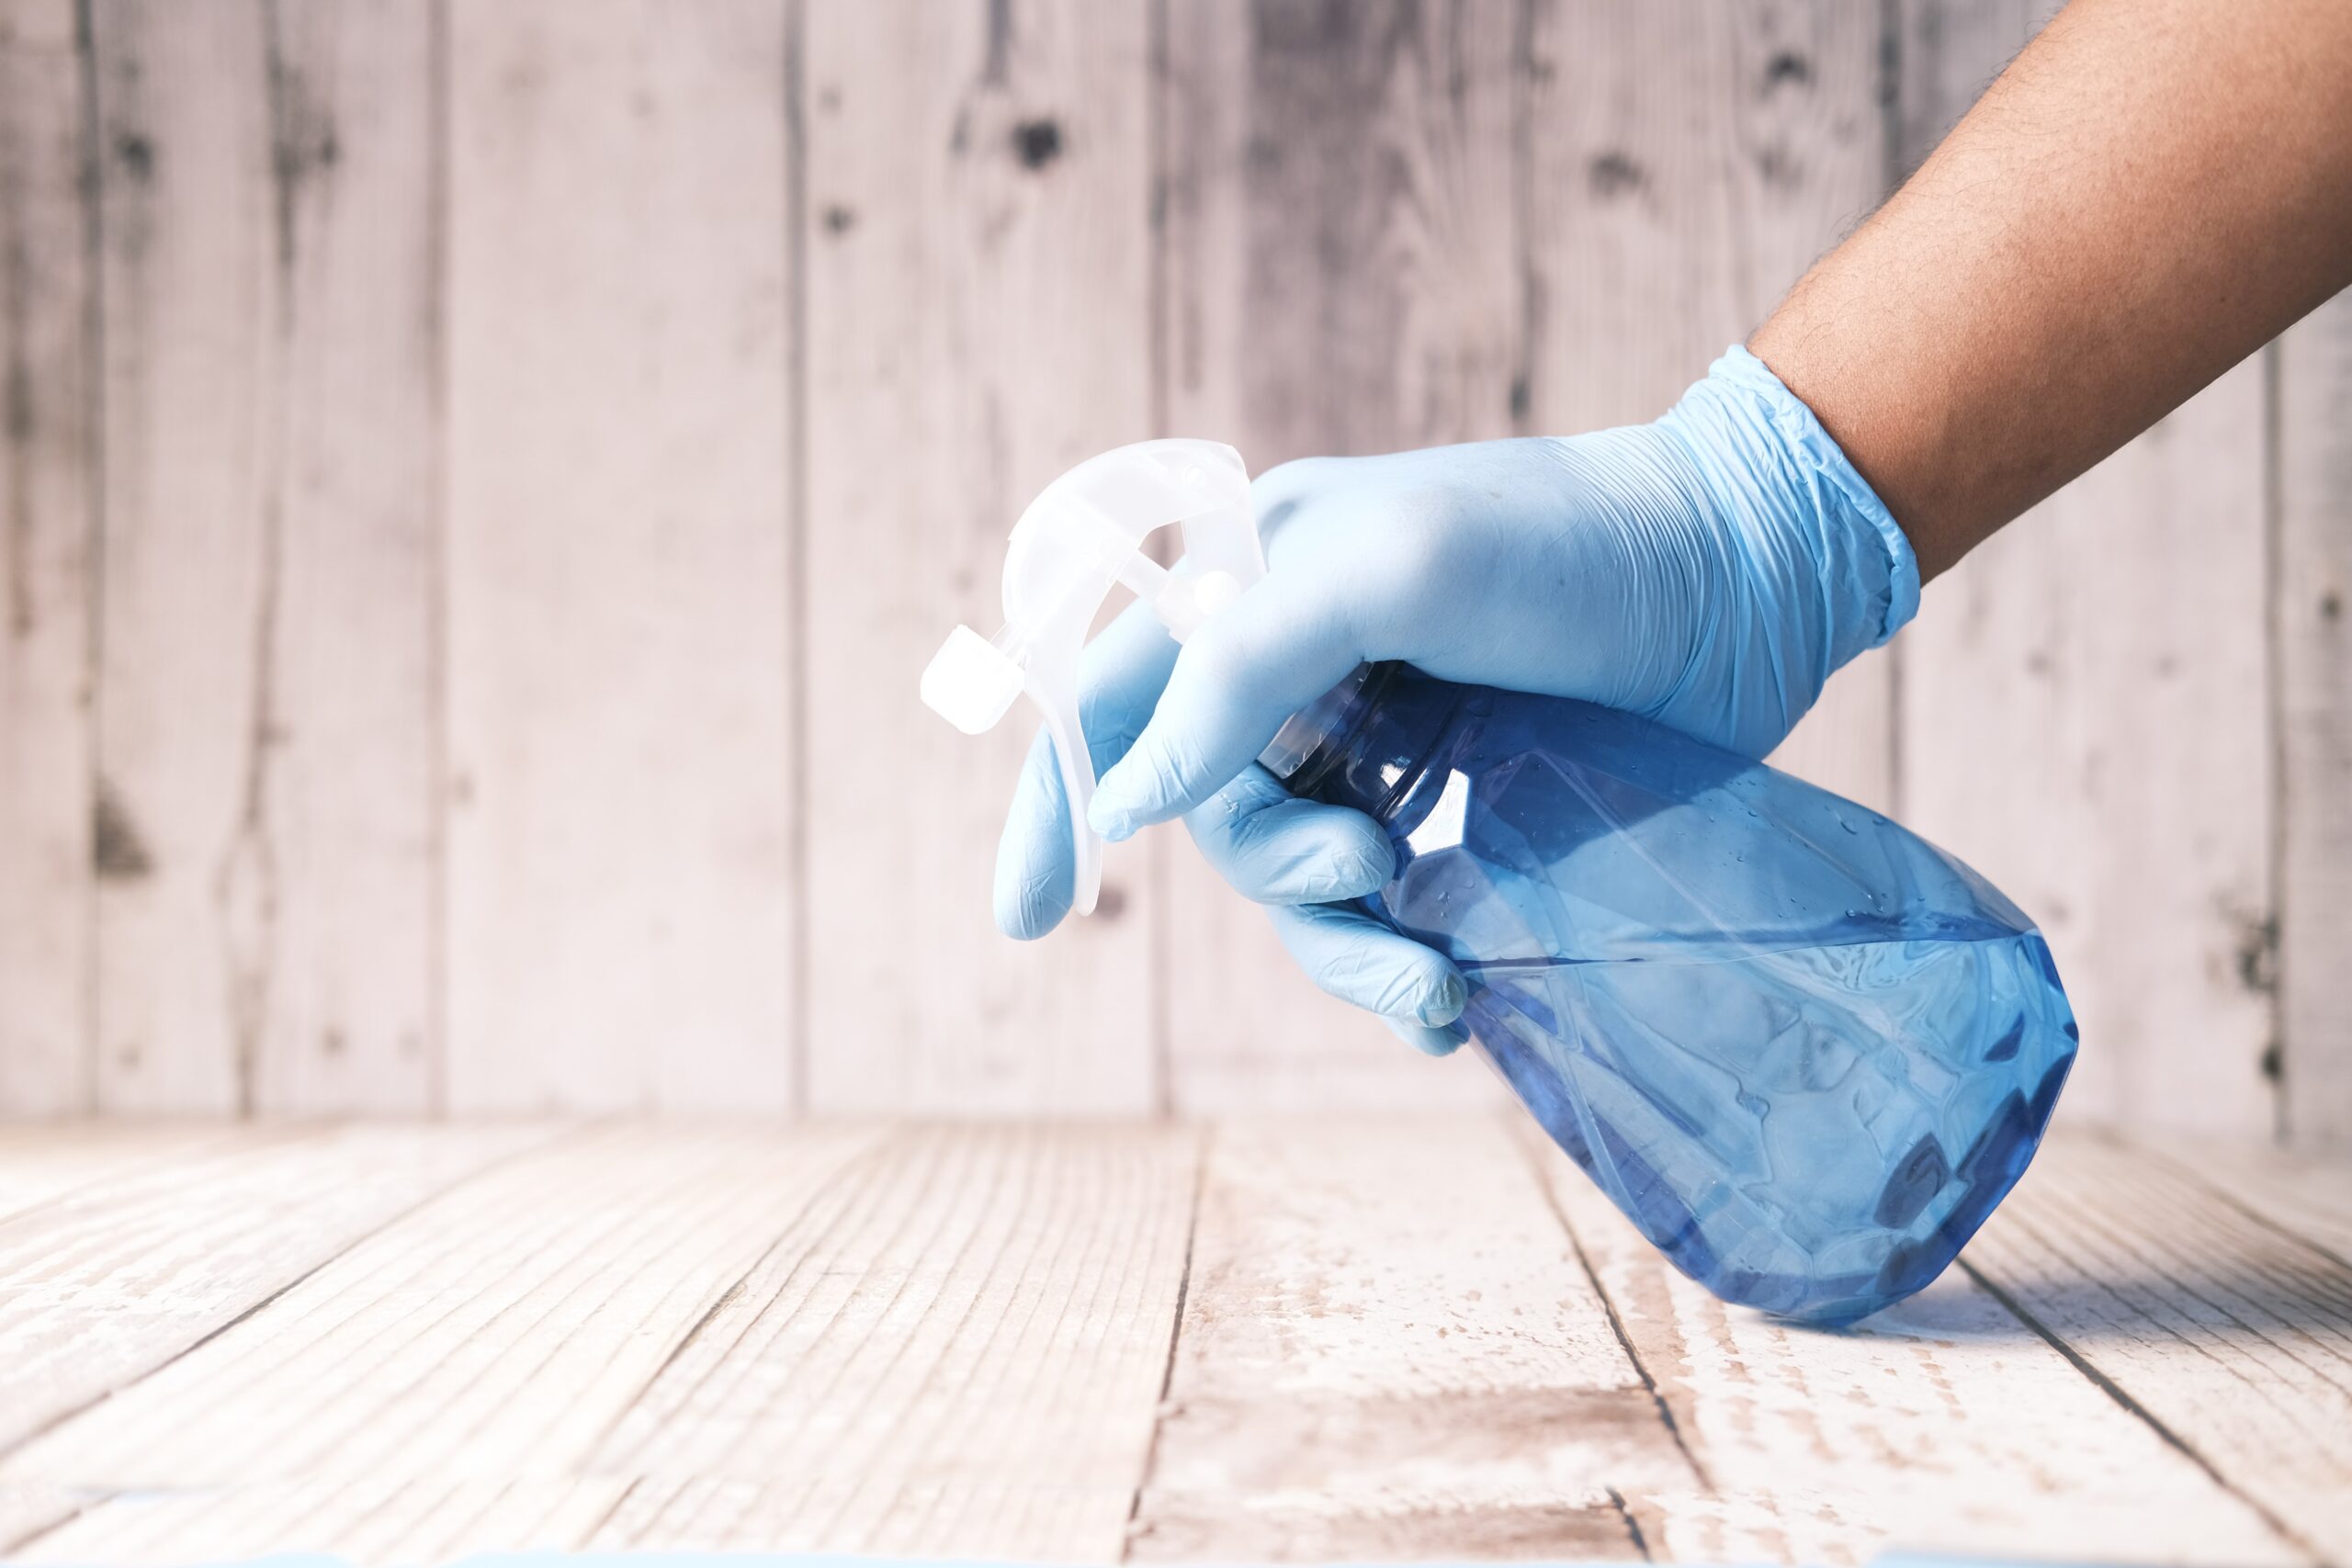 A hand wearing a rubber glove and holding a bottle of cleaning fluid over a surface as part of a side job for real estate agents